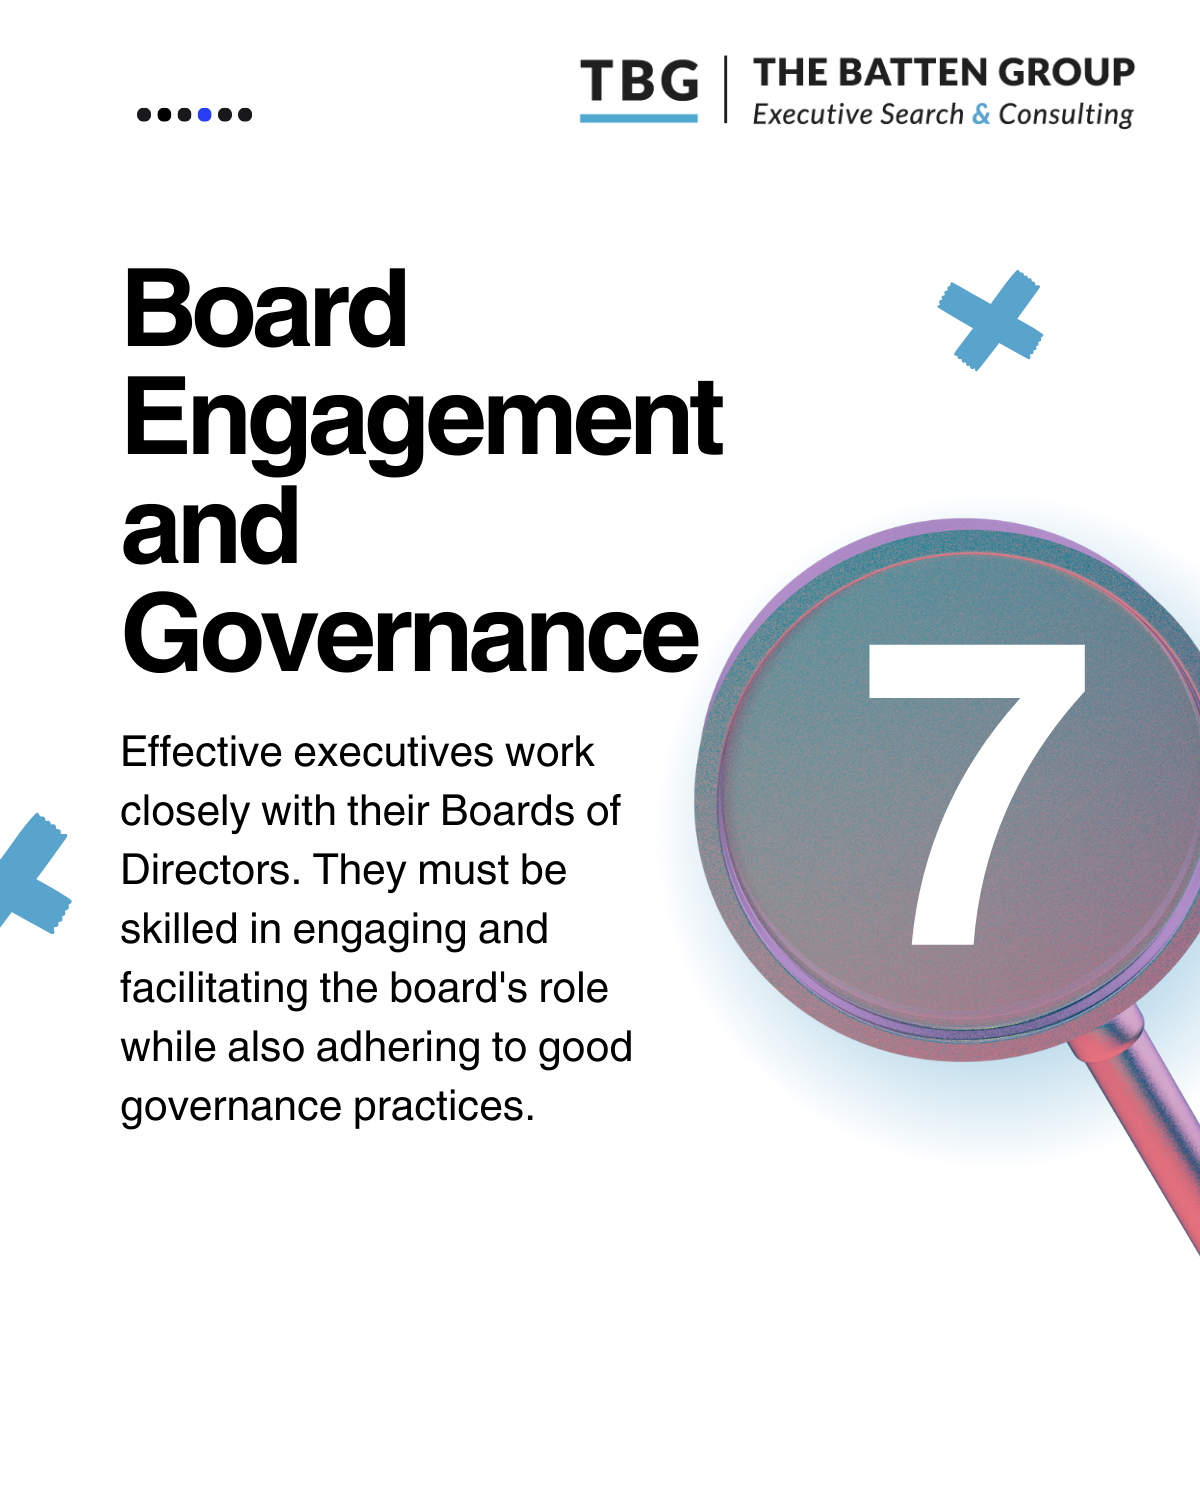 Board Engagement and Governance